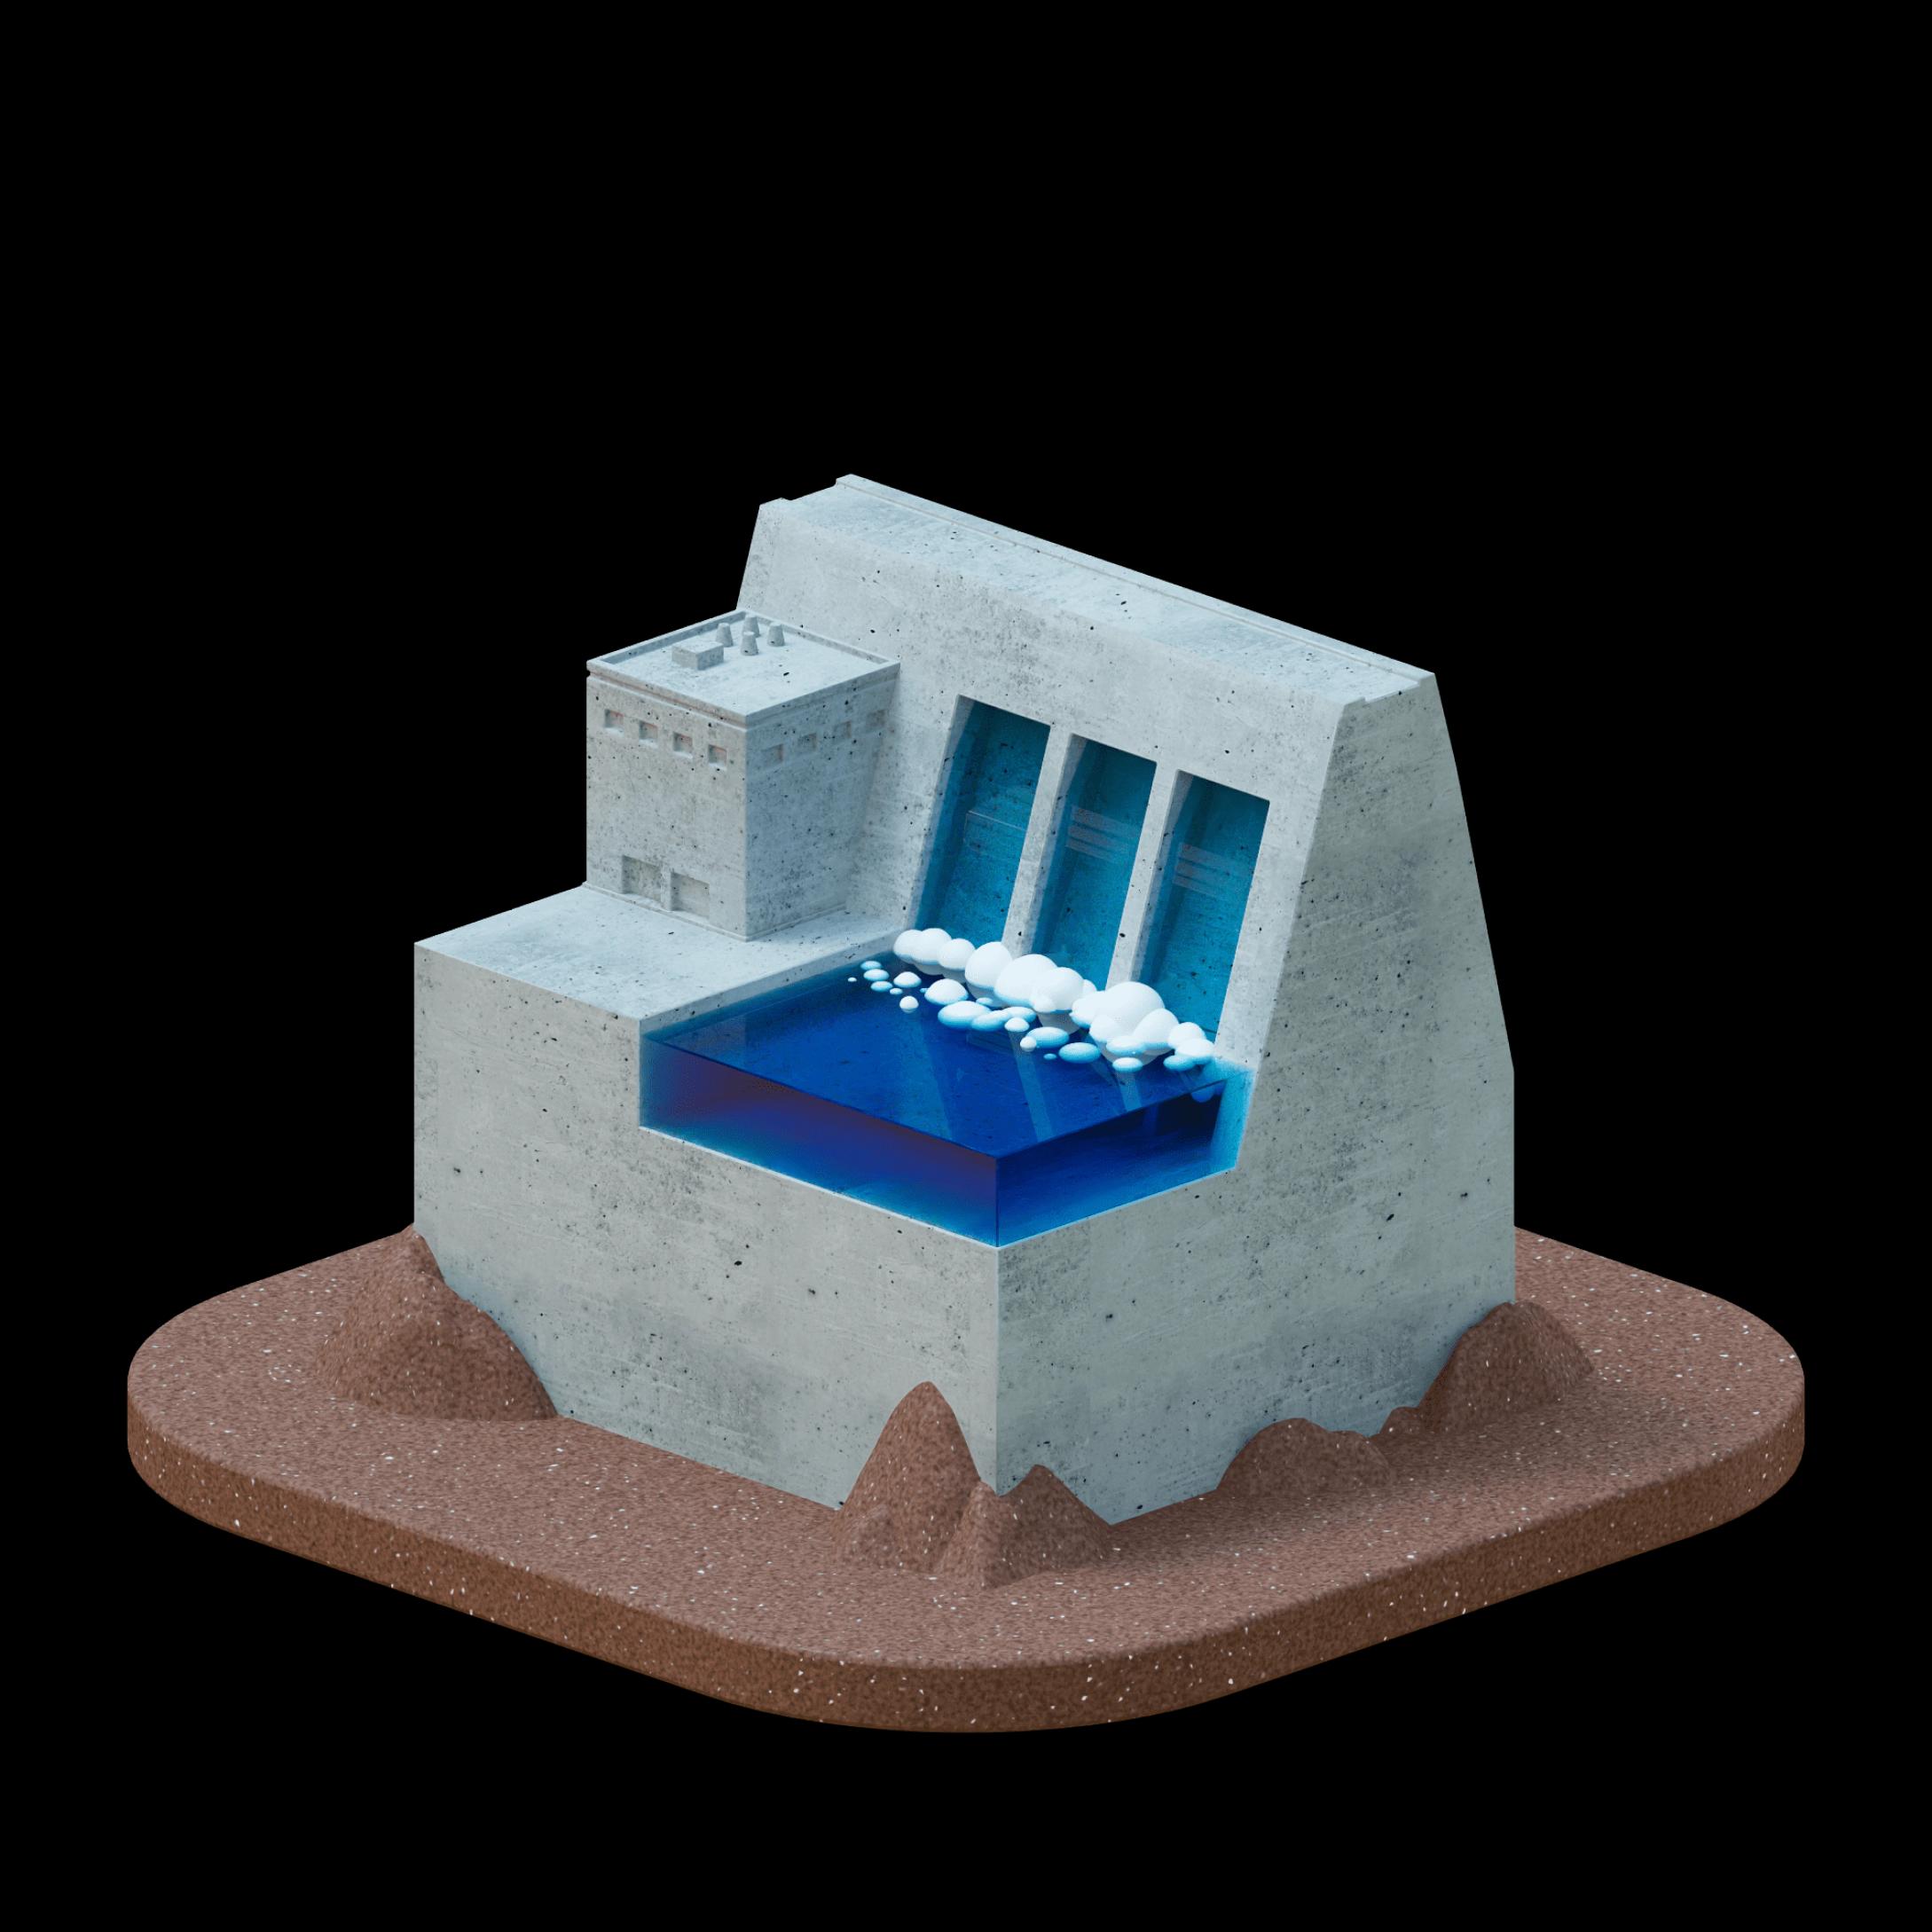 A small 3d model of a hydropower plan with turbines, dam and flowing water